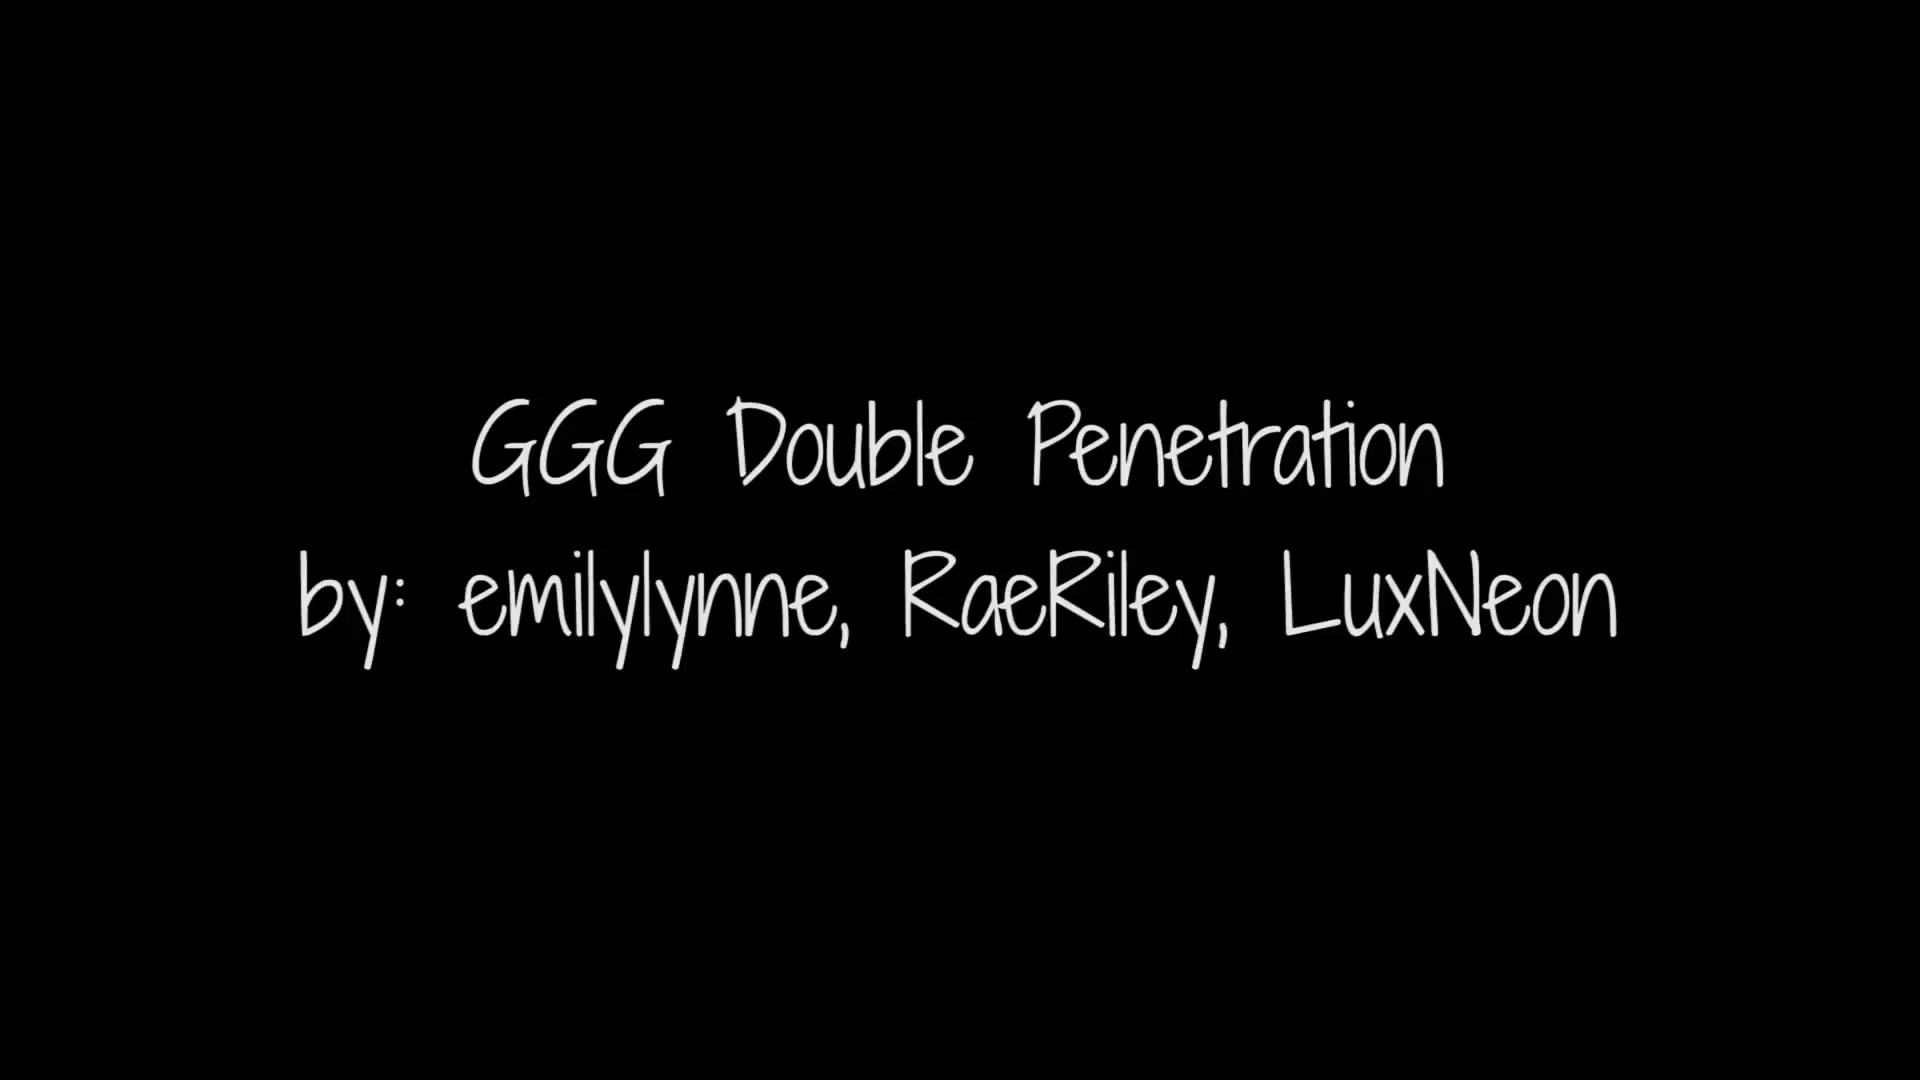 best of Penetration ggg double